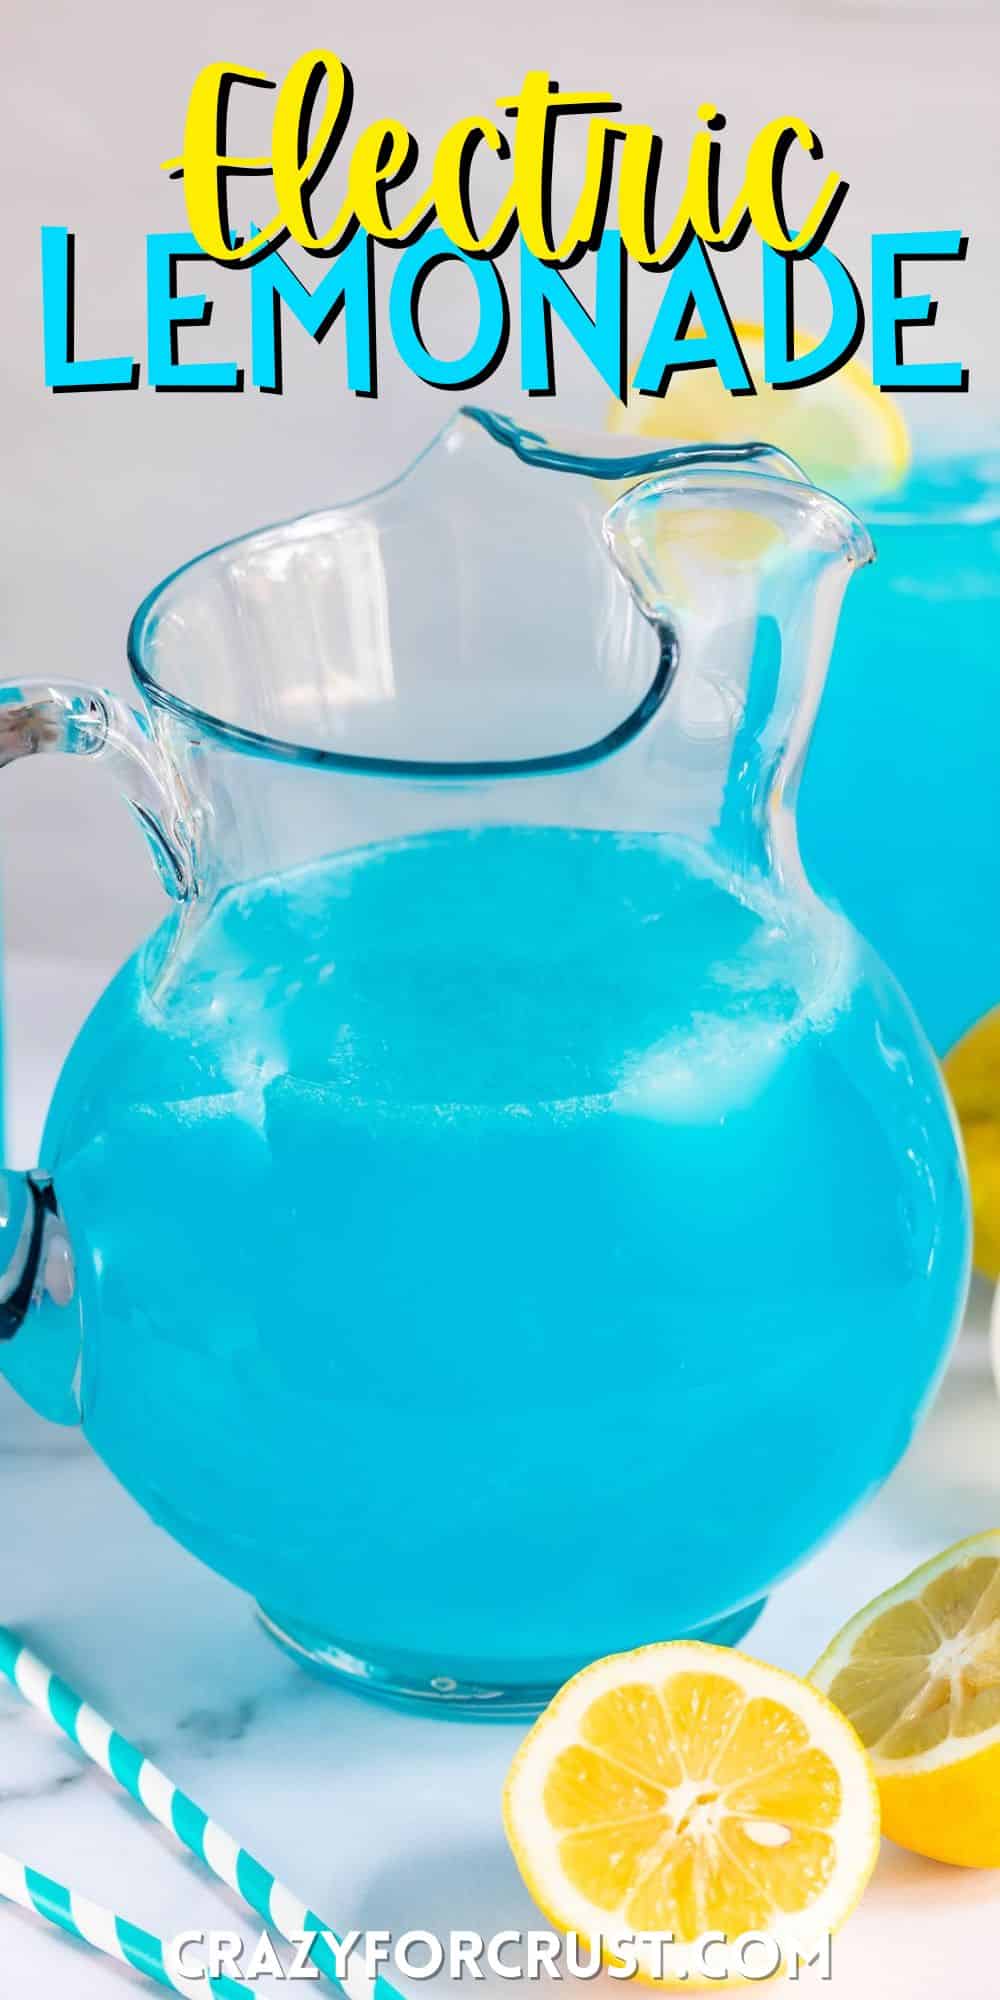 big glass pitcher filled with a bright blue drink and lemon sliced all around with words on the image.